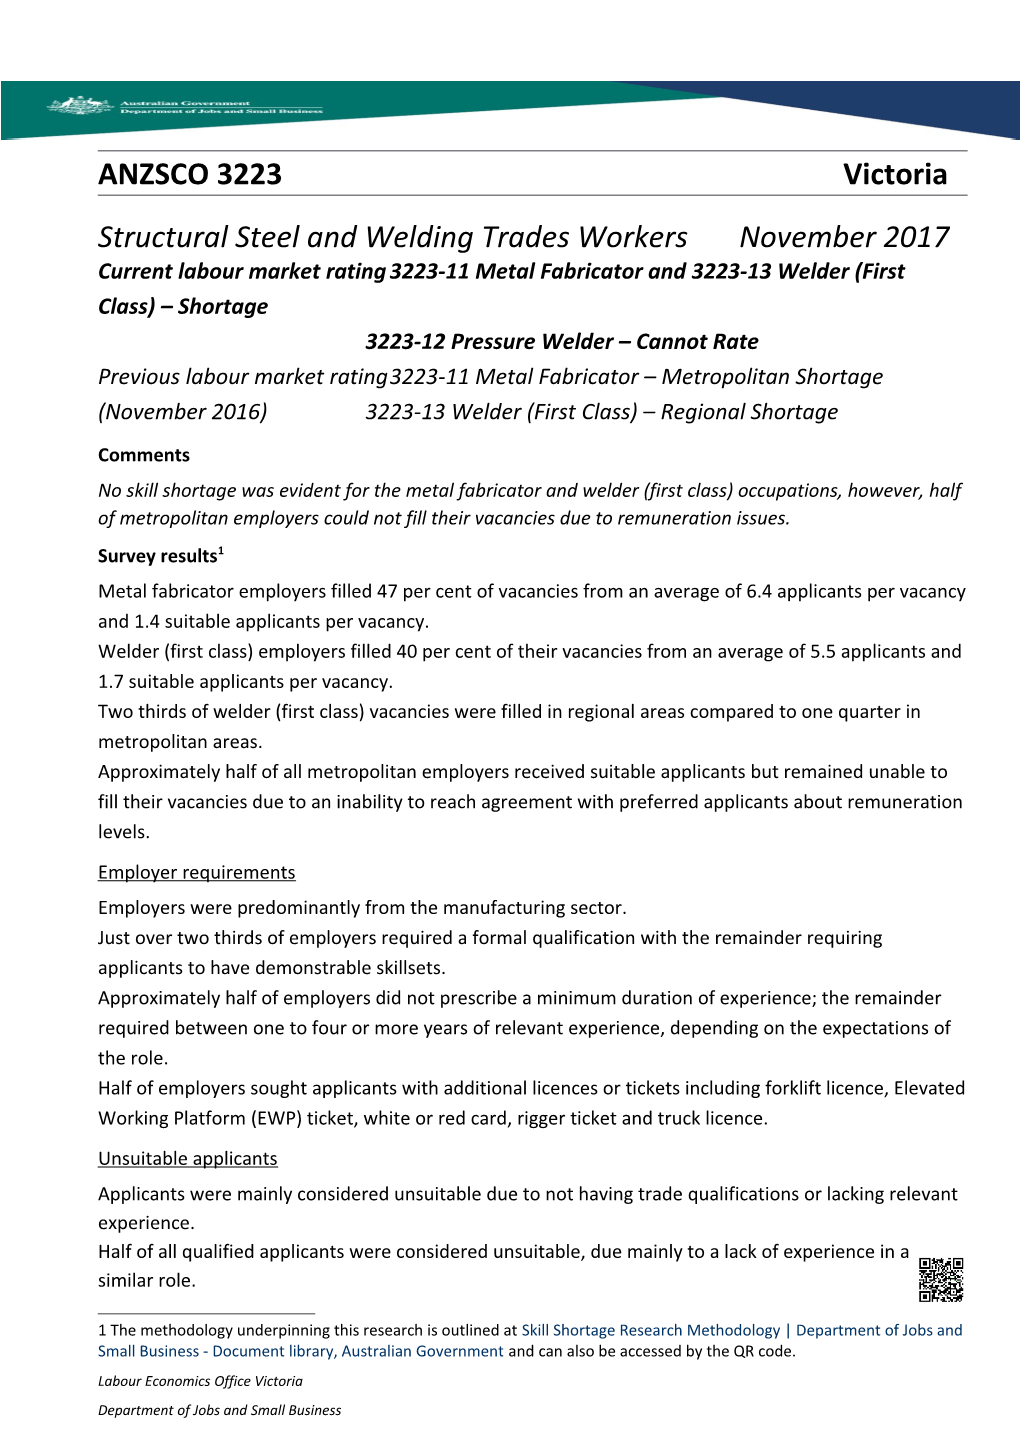 Structural Steel and Welding Trades Workersnovember 2017